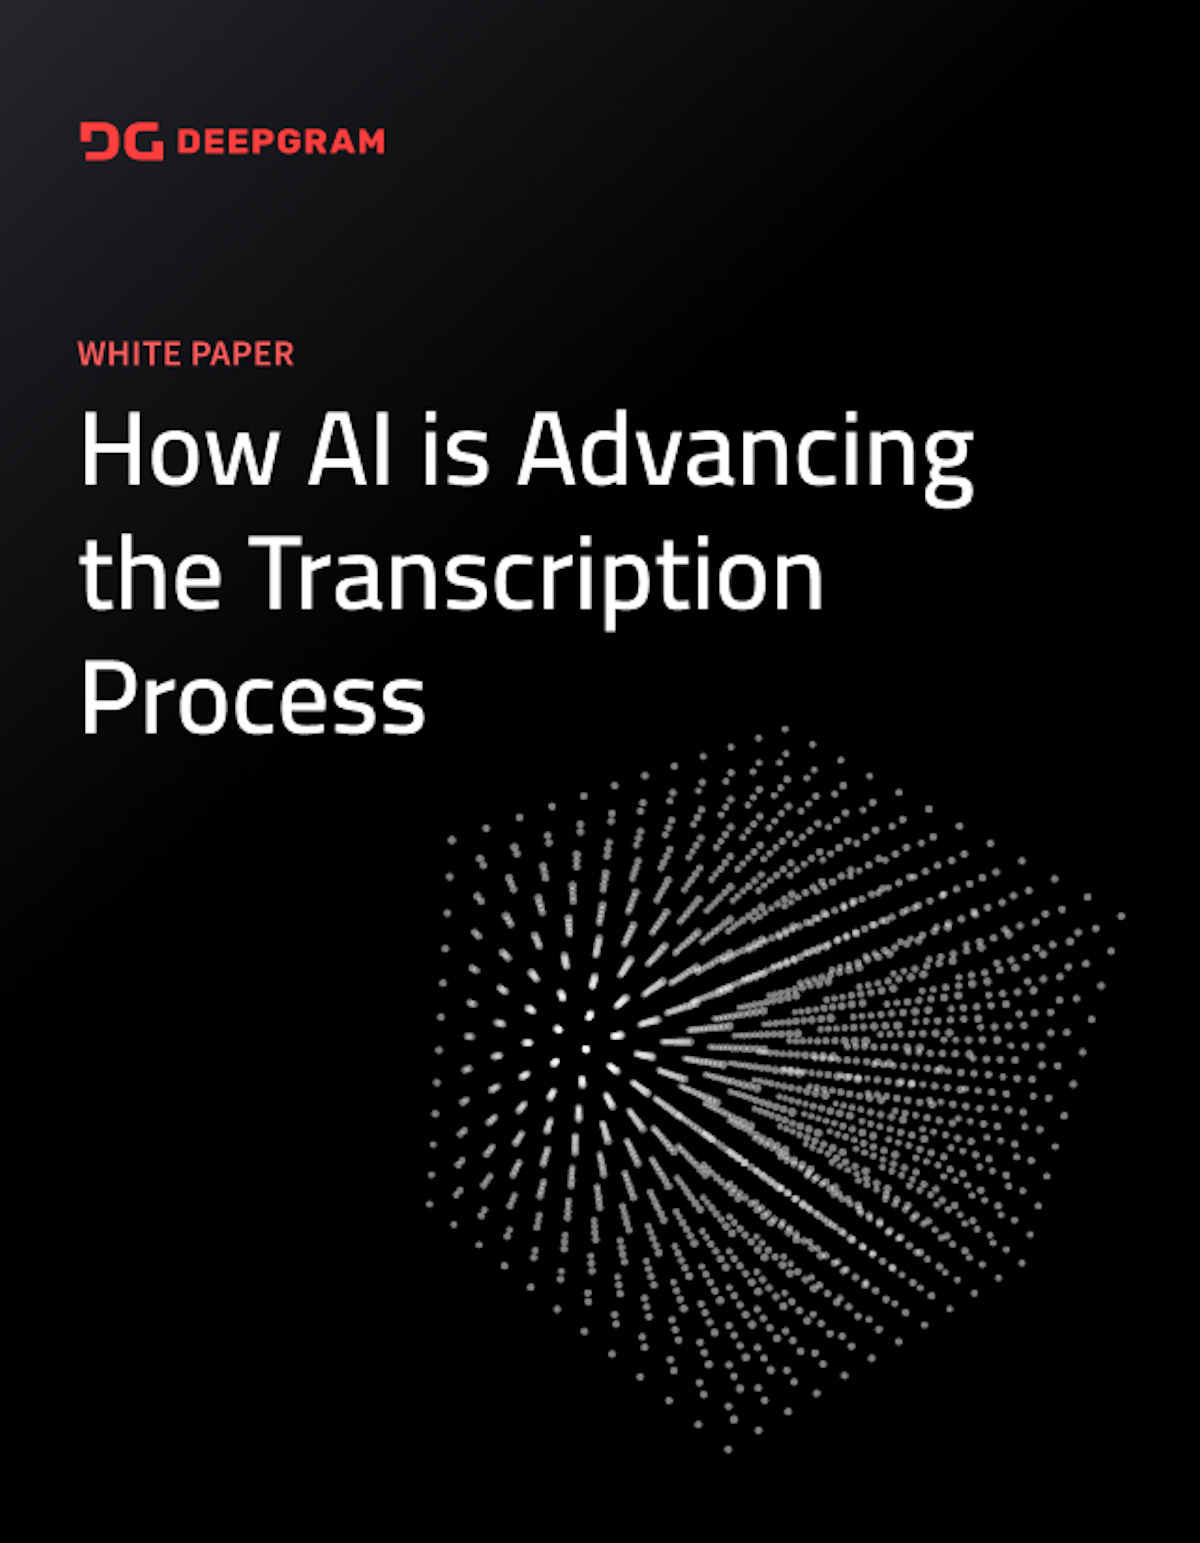 How AI is Advancing the Transcription Process